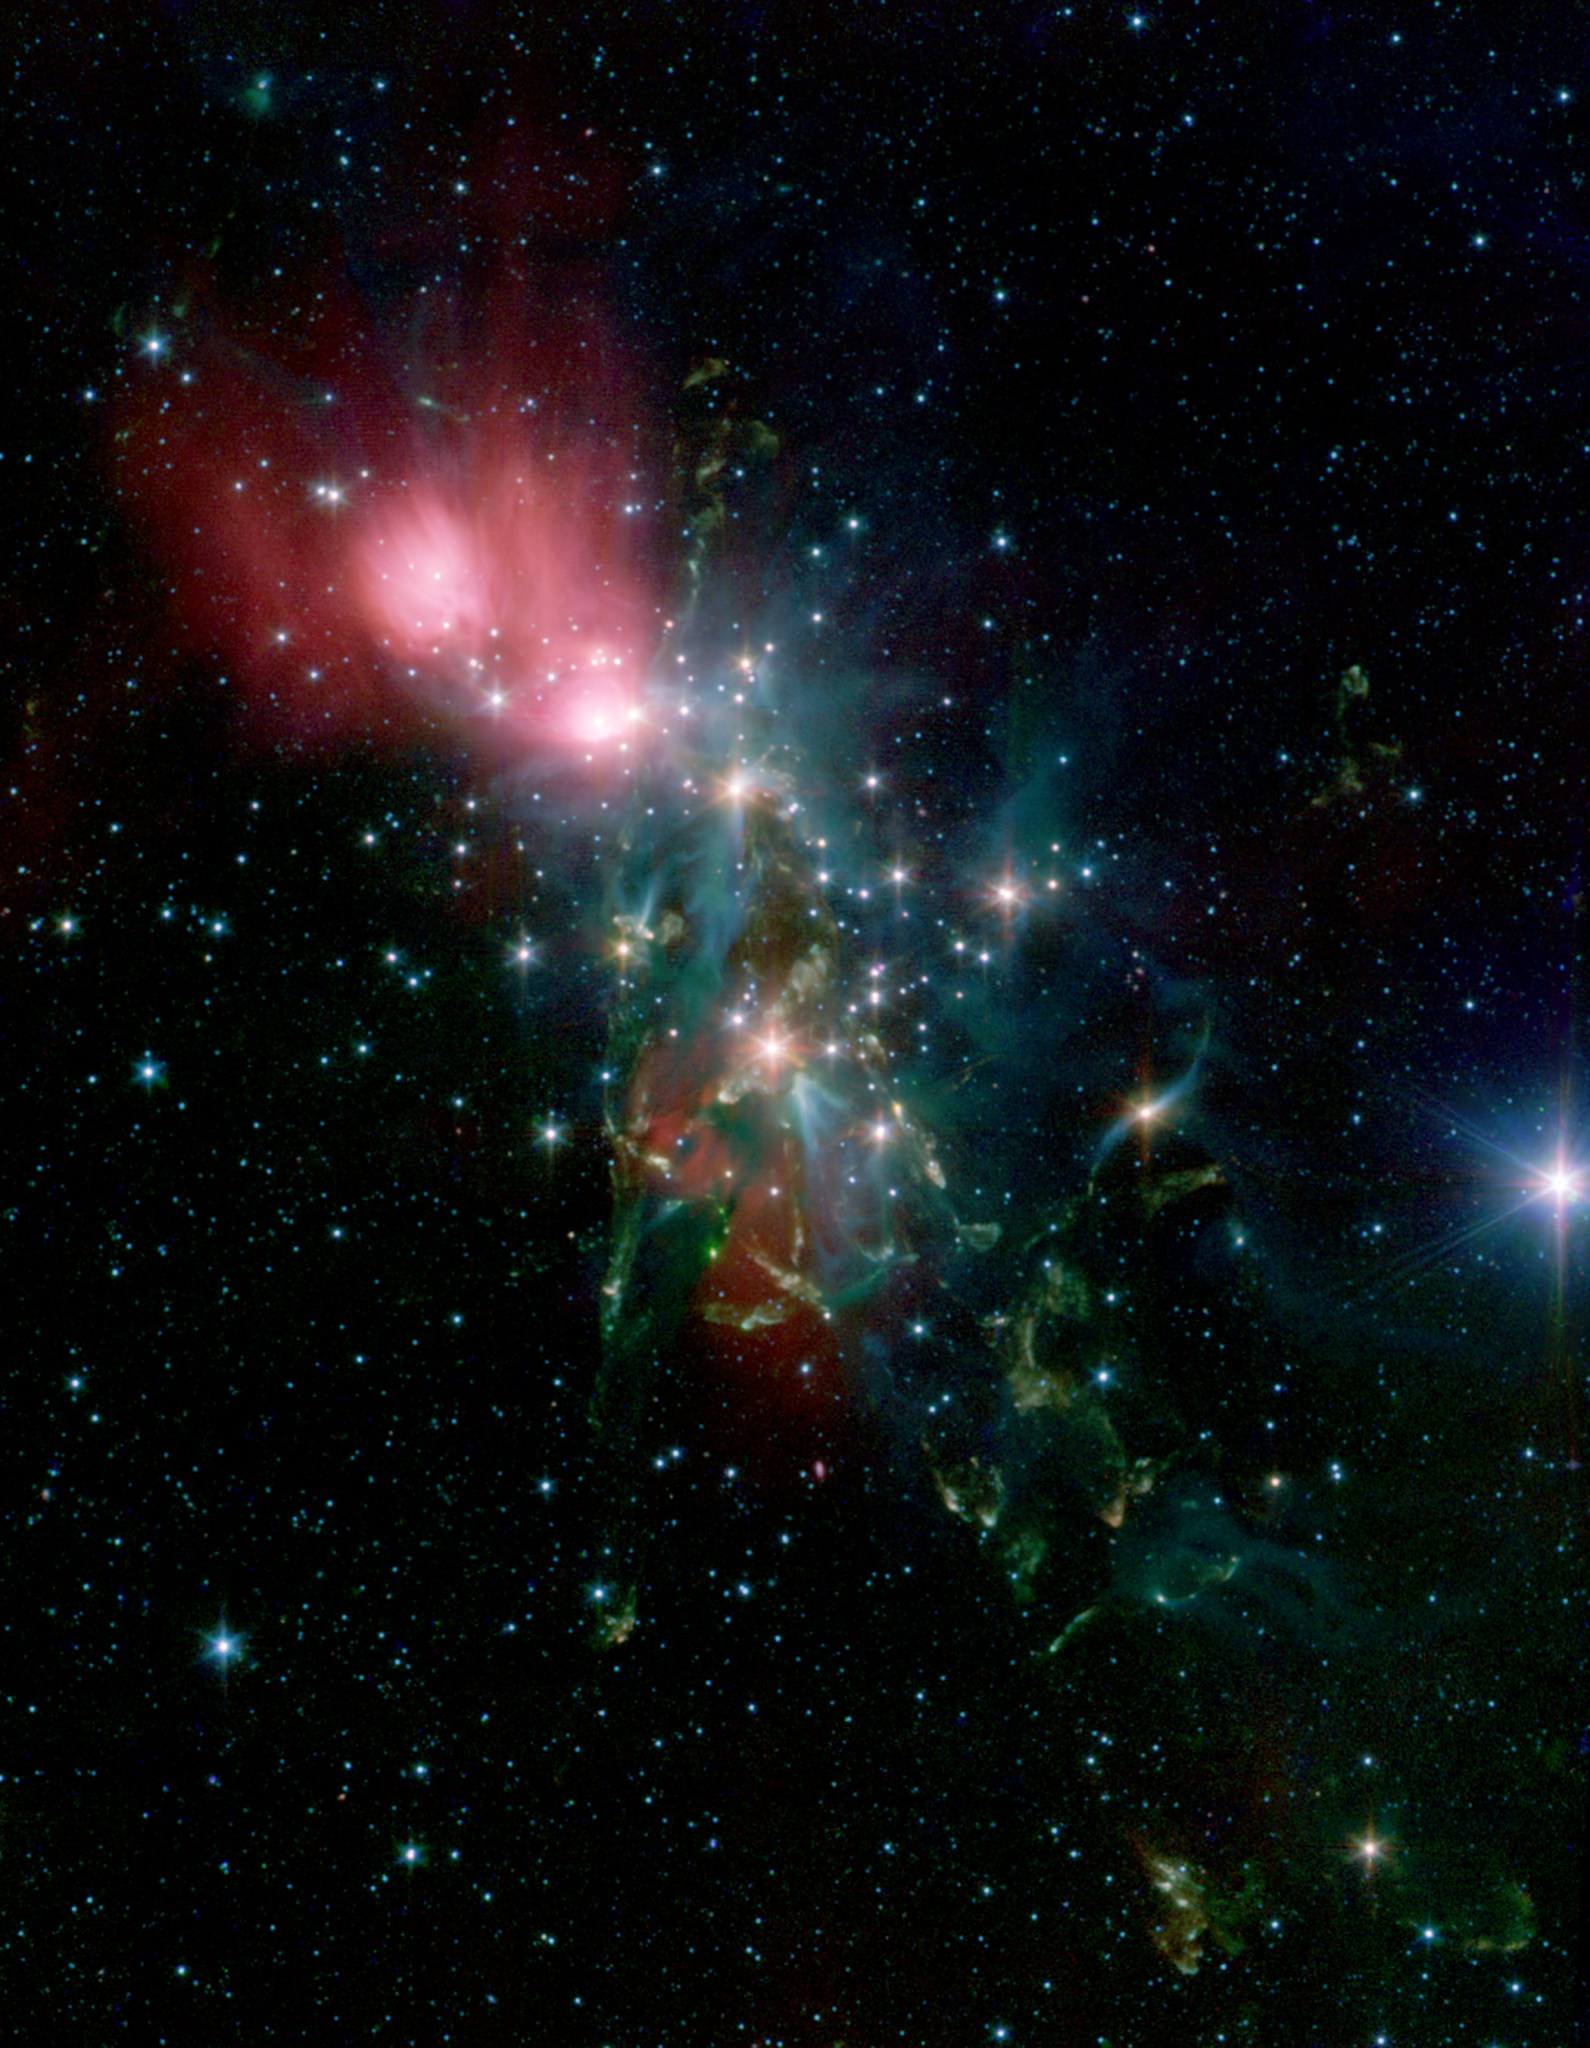 Scientists will use Webb to search the nearby stellar nursery NGC 1333 for its smallest, faintest residents.